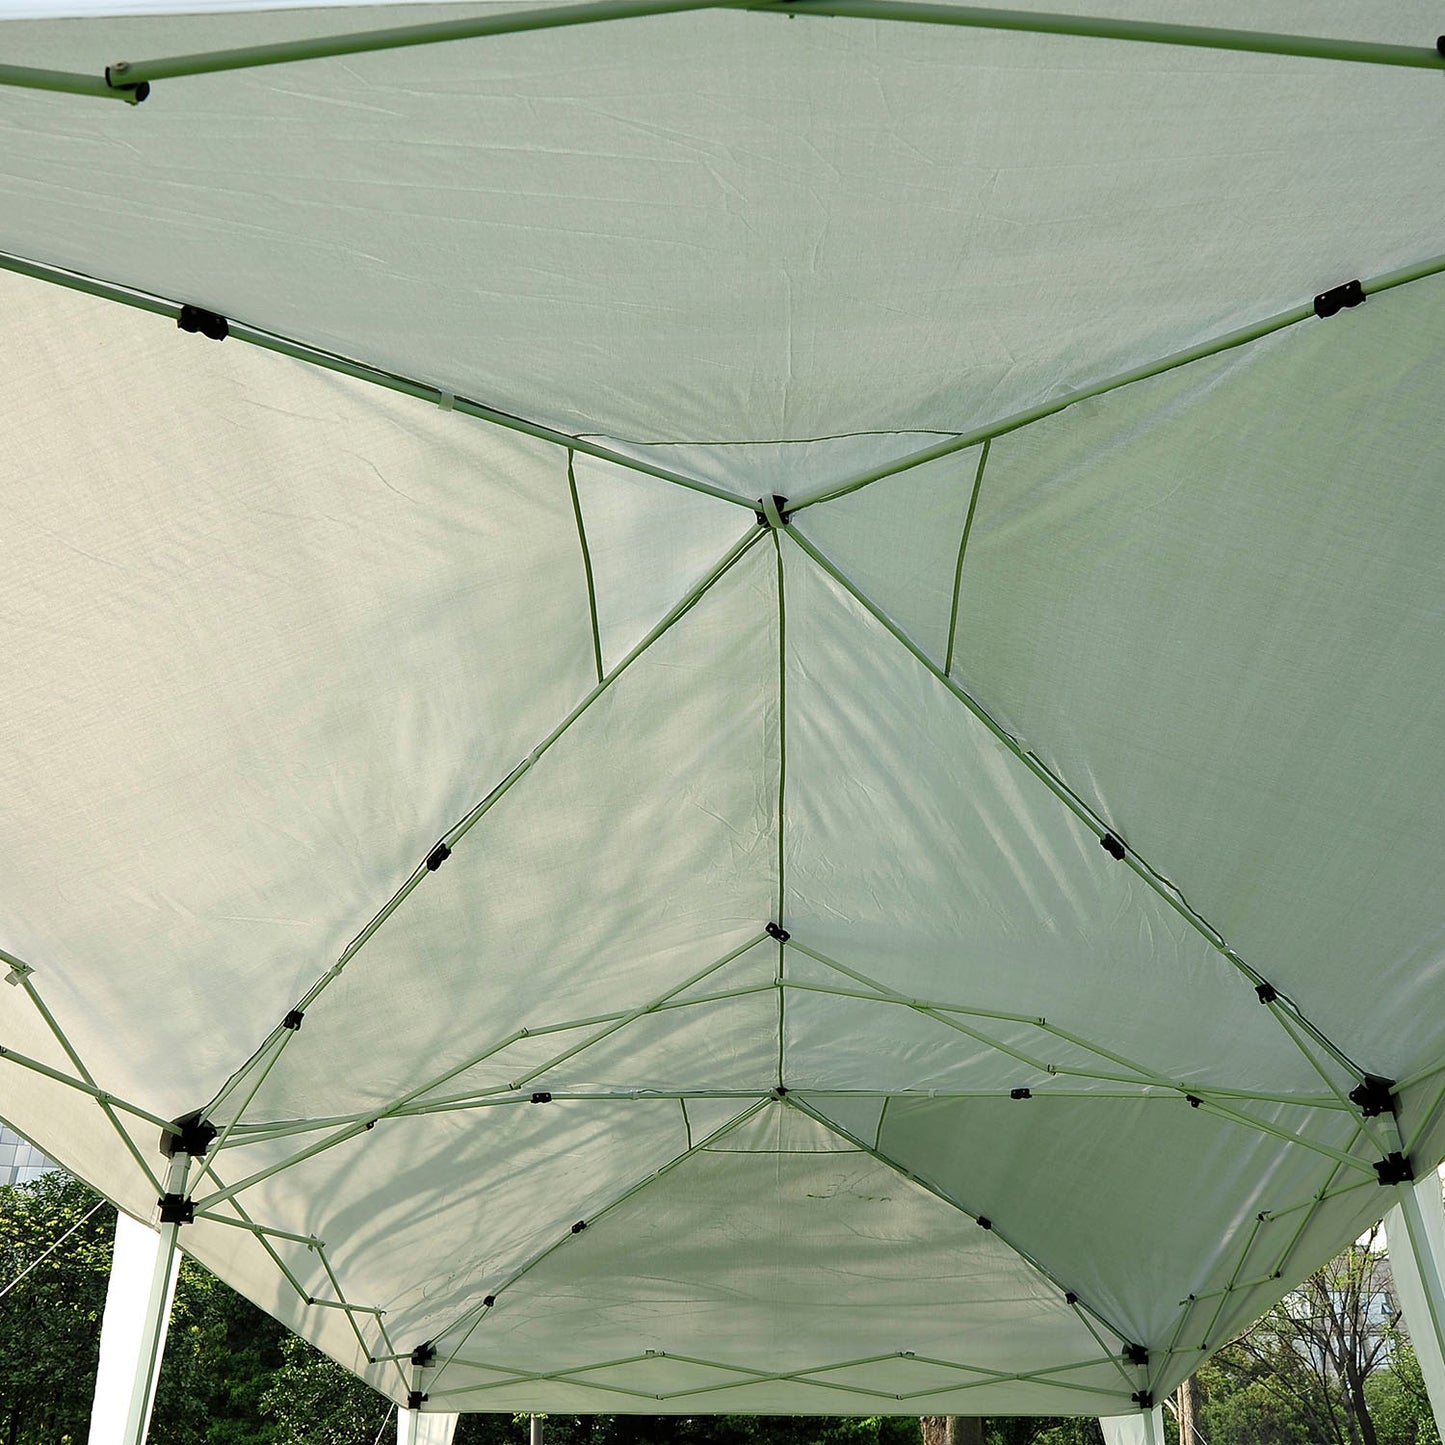 Outsunny 3 x 6m Garden Heavy Duty Water Resistant Pop Up Gazebo Marquee Party Tent Wedding Canopy Awning-White